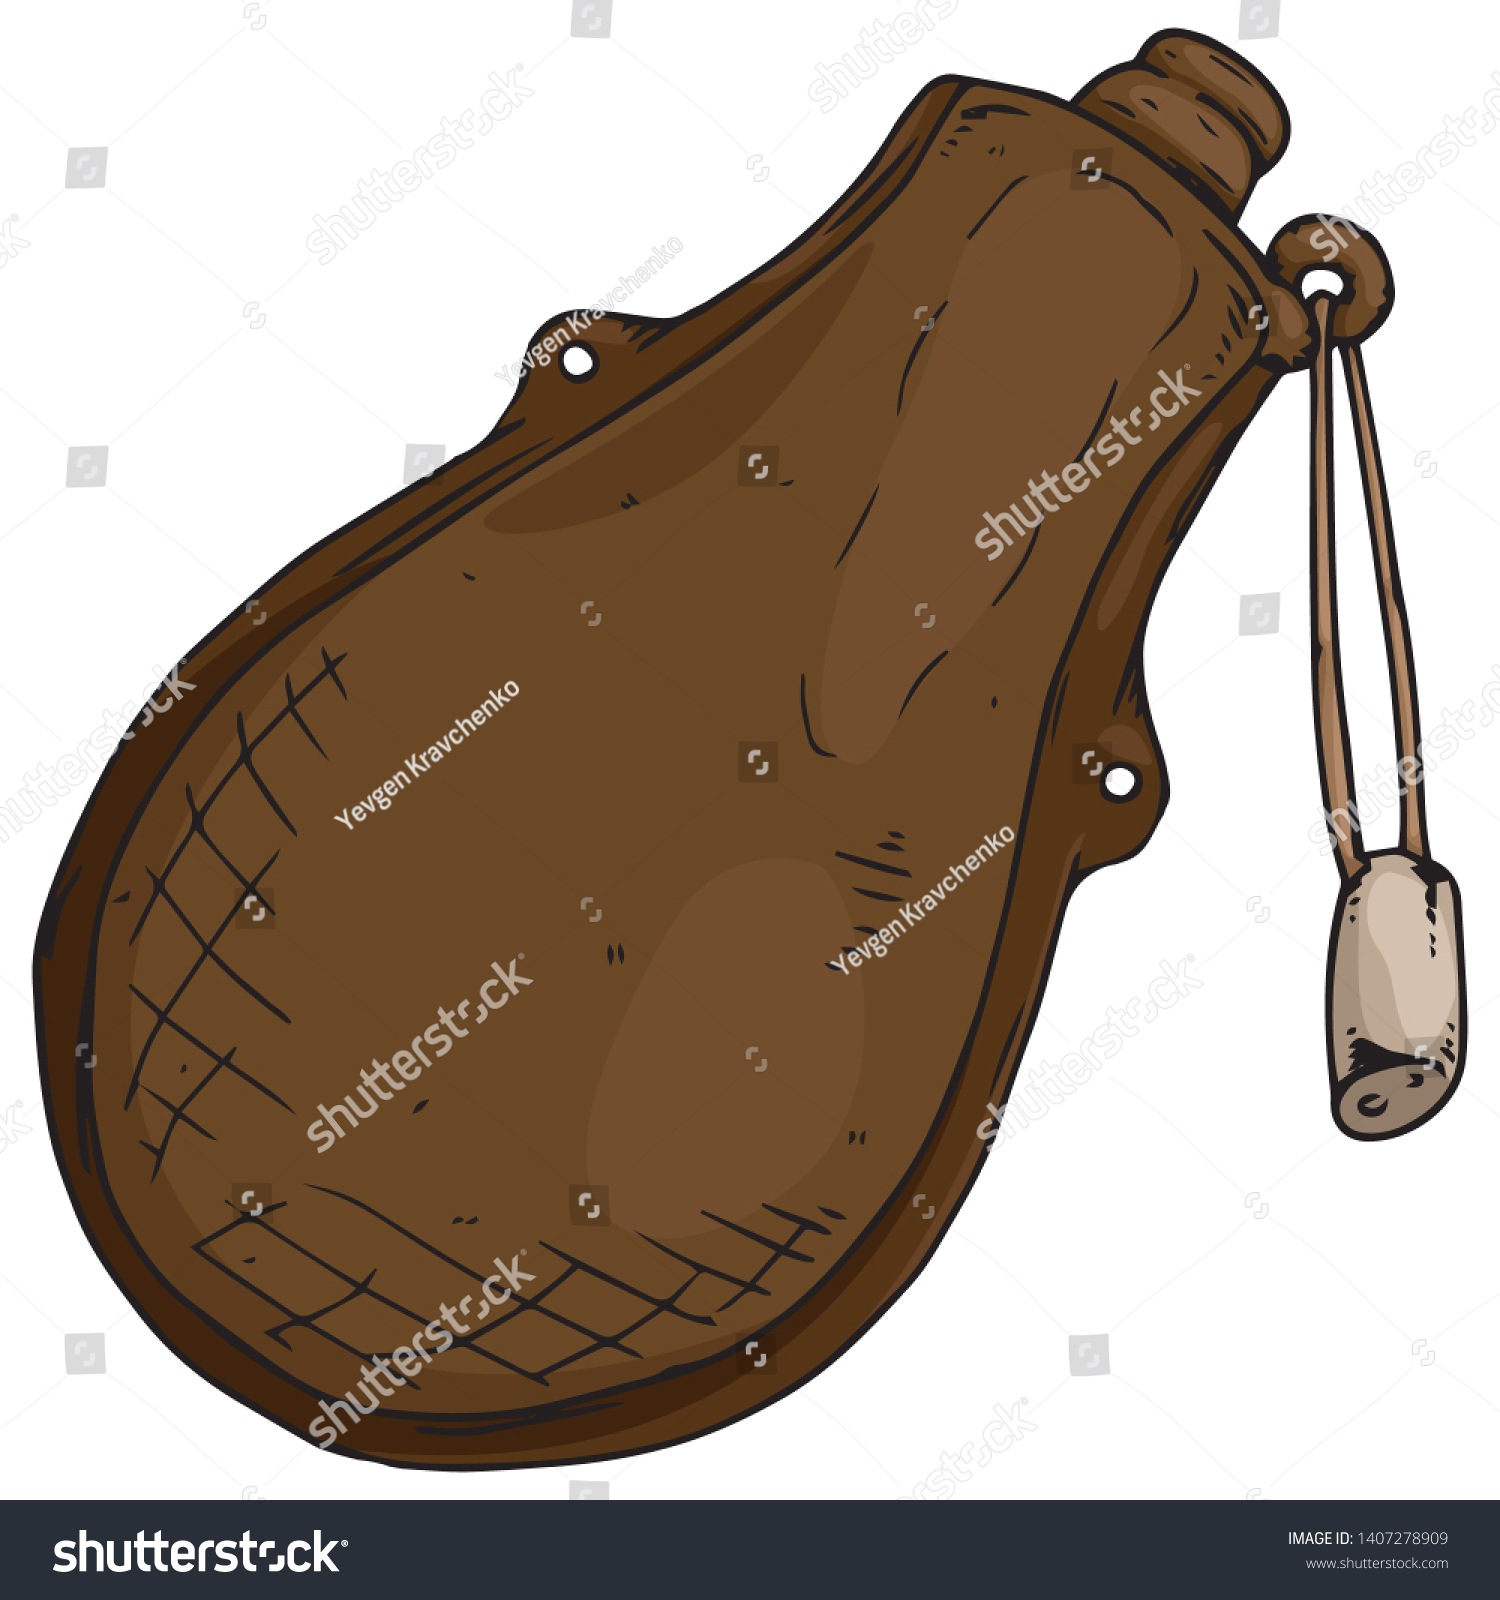 Download Leather Flask Icon Vector Illustration Old Stock Vector Royalty Free 1407278909 Yellowimages Mockups